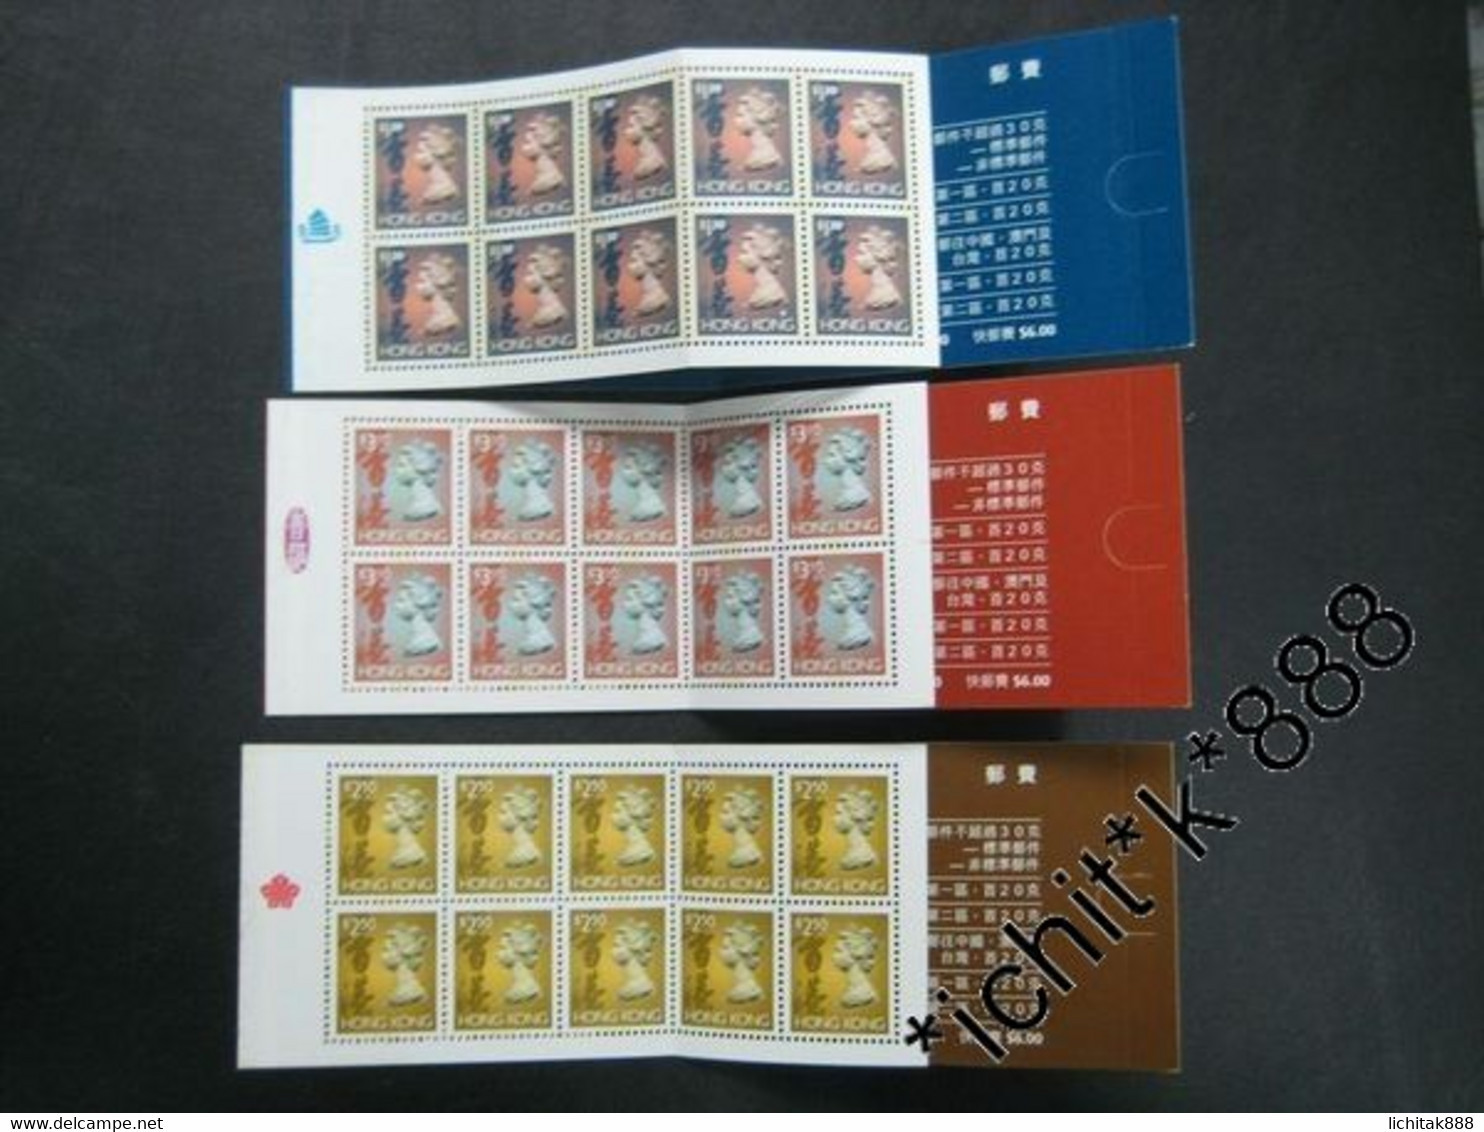 China Hong Kong 1996 小本 Seven Eleven Booklet Bird Definitive Stamp X 3 Toning - Booklets